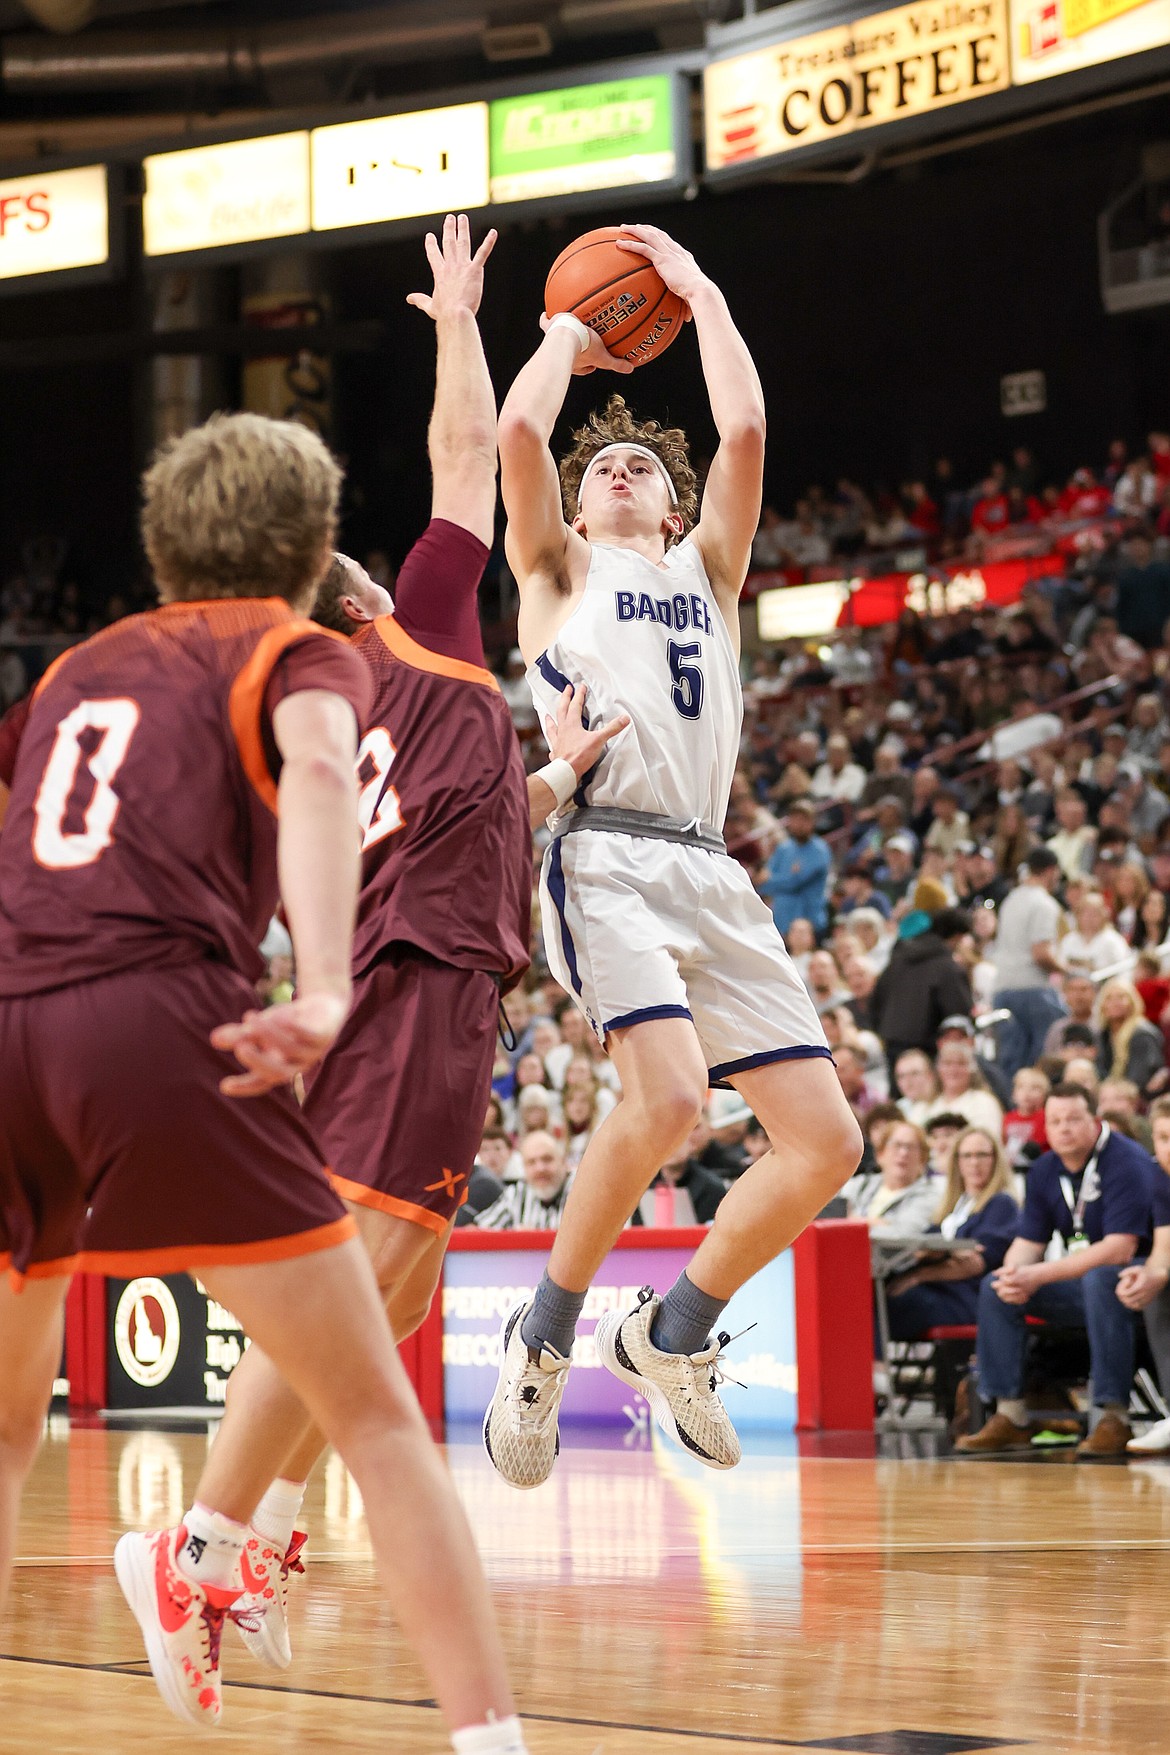 Brody Rice shoots a jump shot at the 3A State Championship game on March 2.